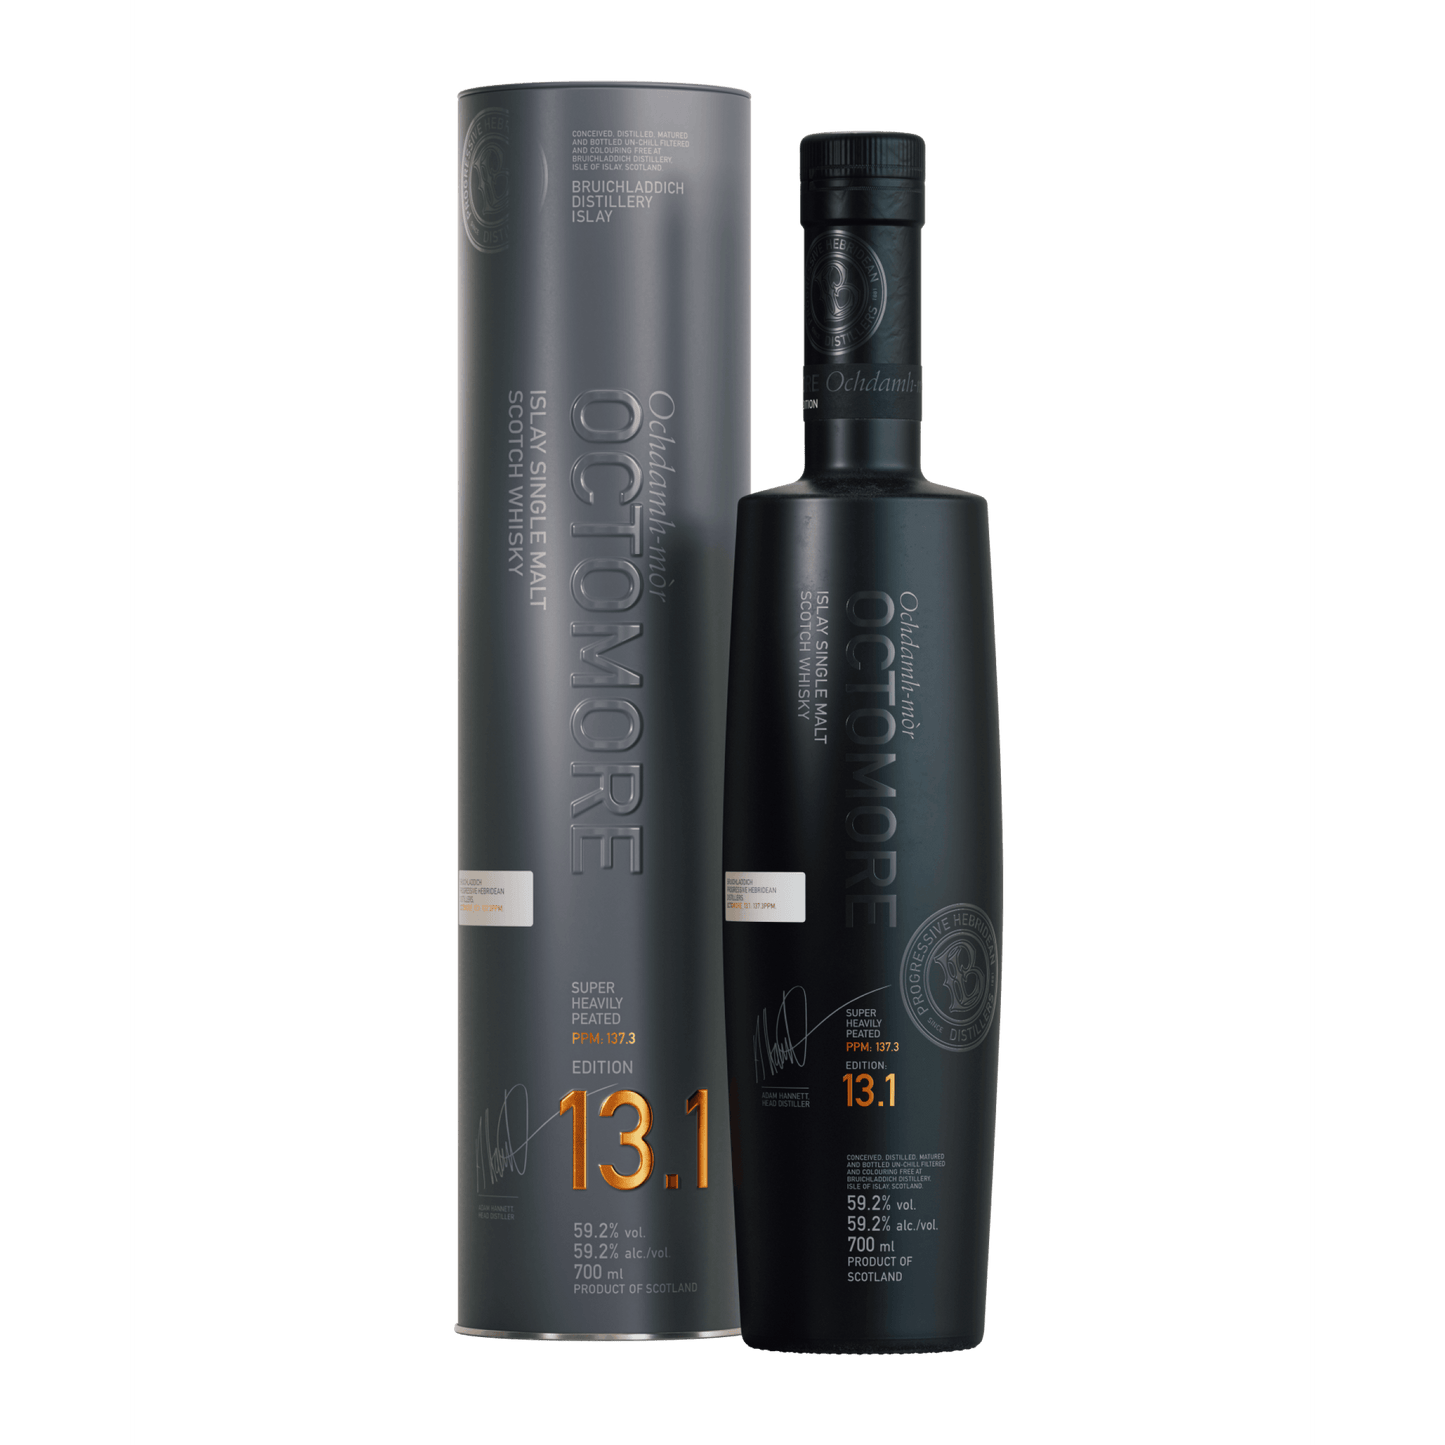 Octomore 13.1 - Whisky Grail